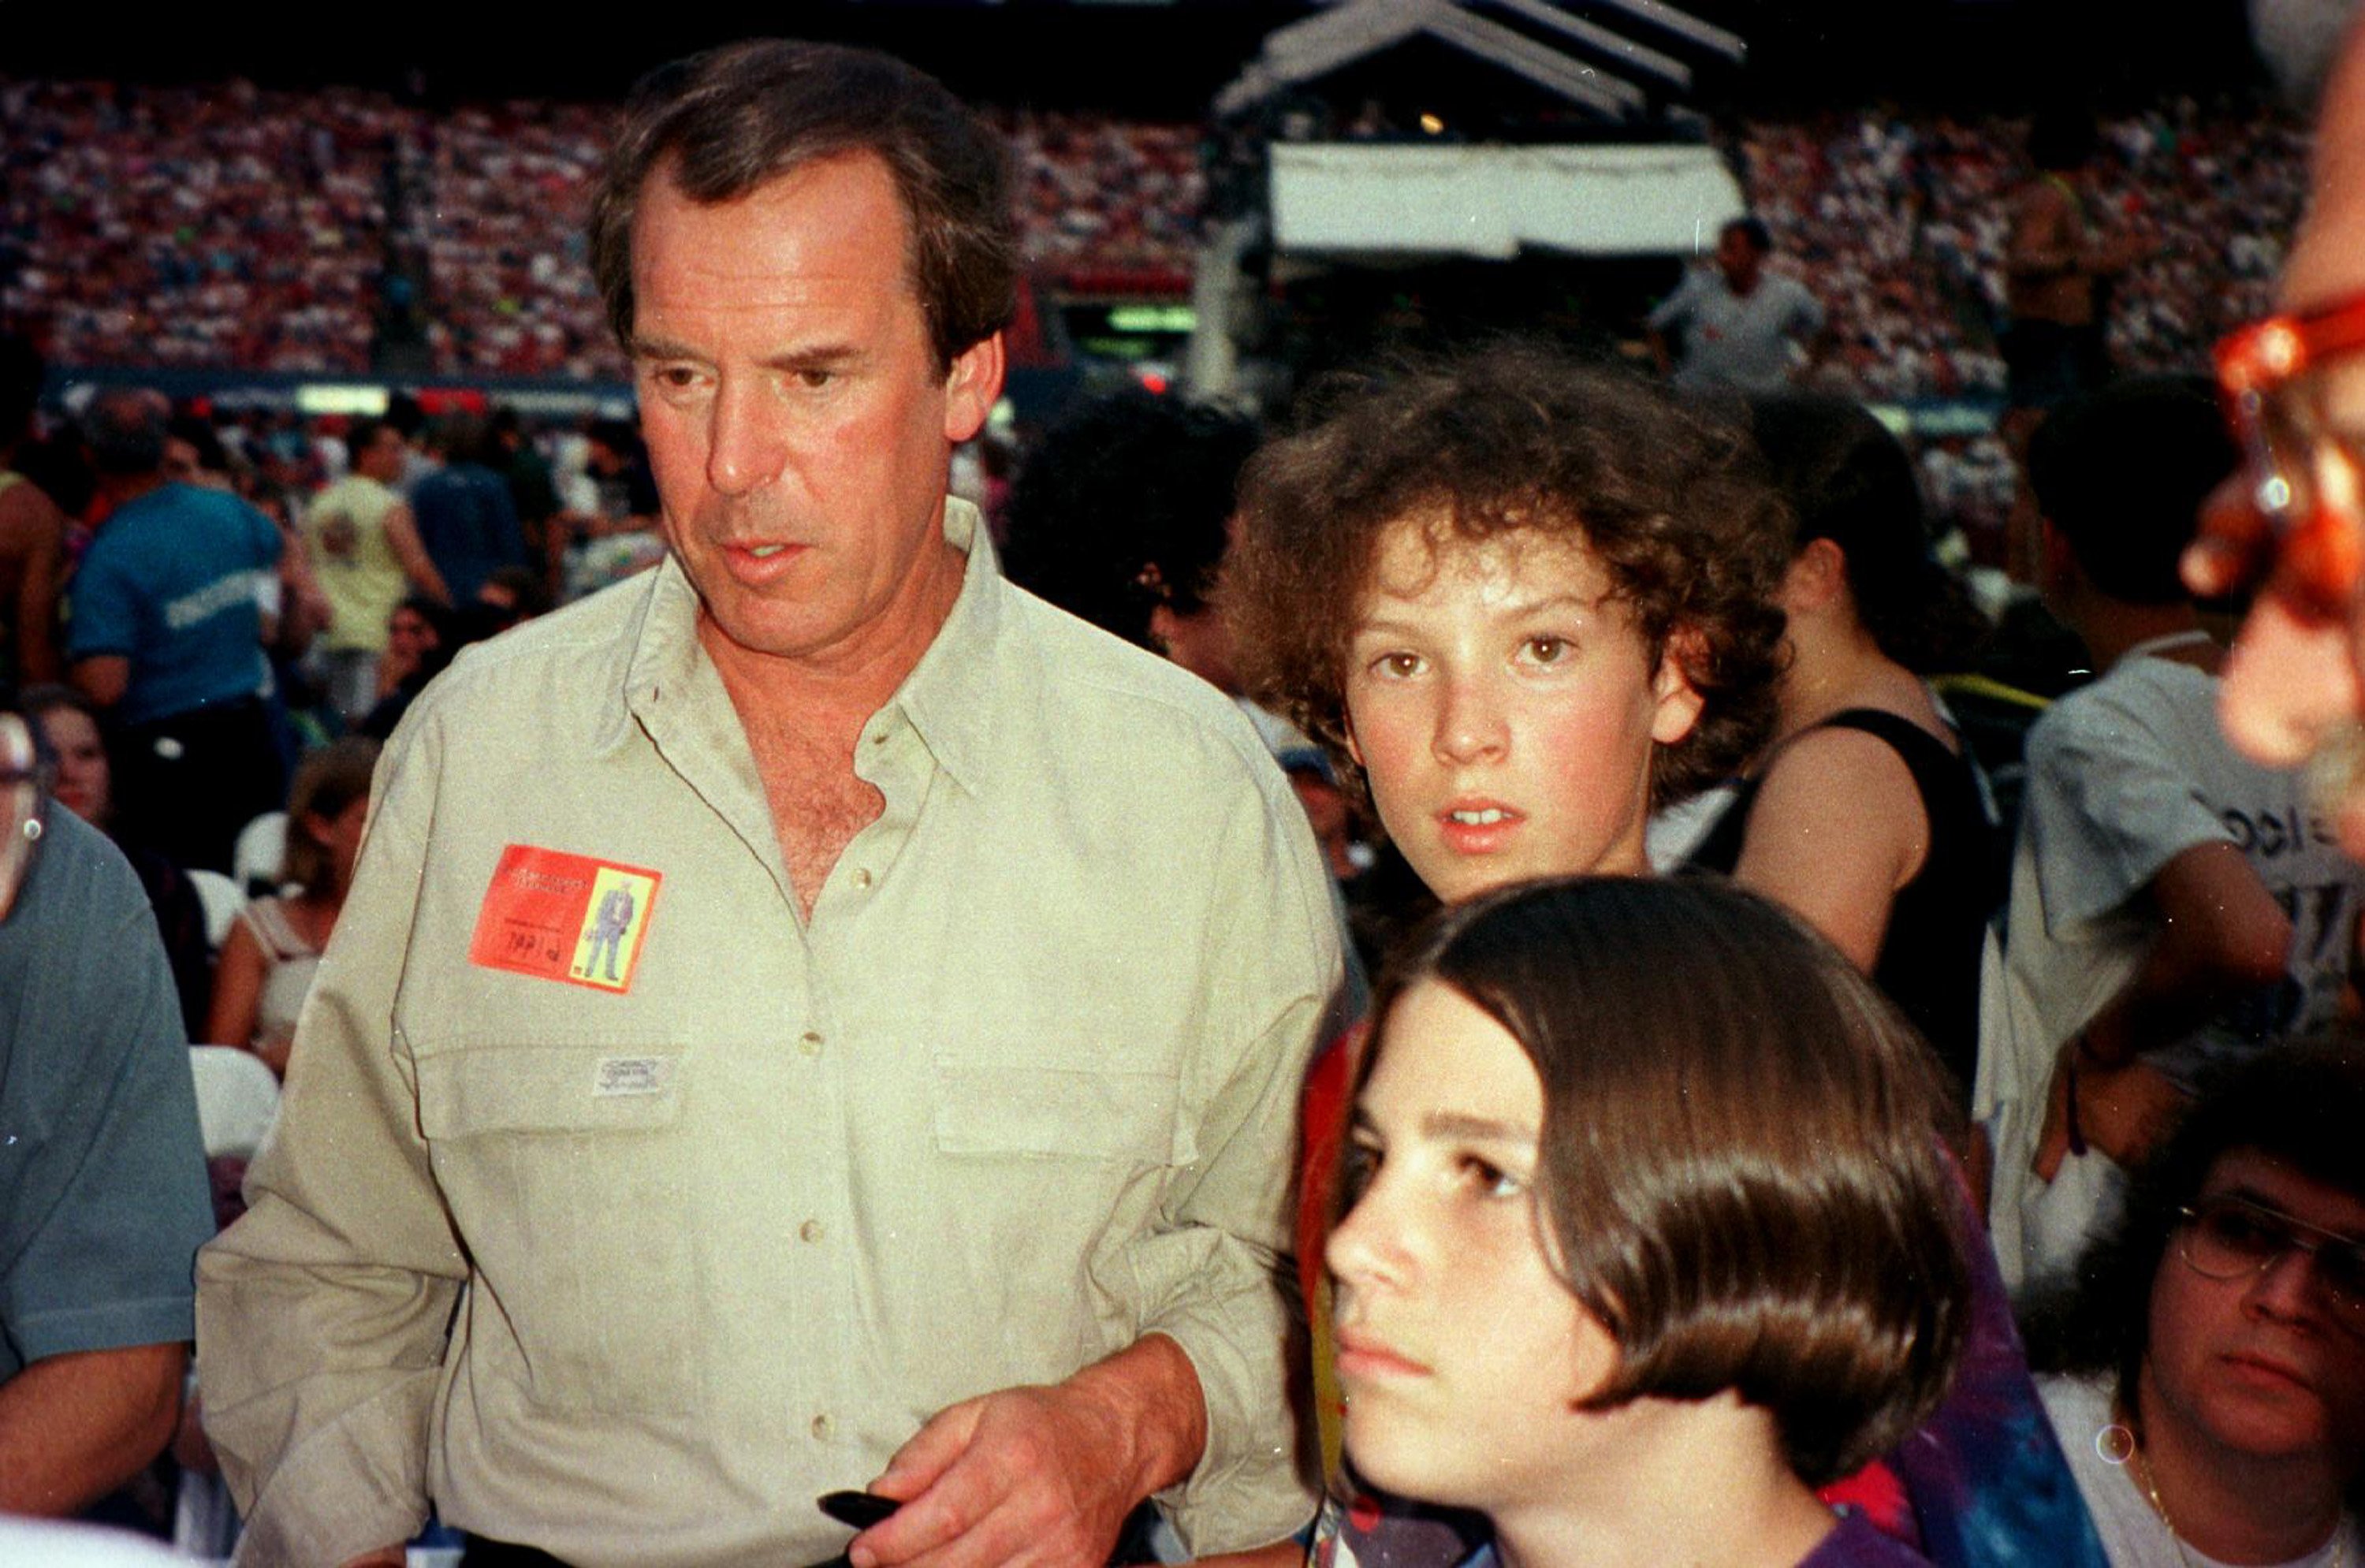 Peter Jennings with his son during Peter Jennings at Grateful Dead Concert at Giants Stadium in East Rutherford, New Jersey | Source: Getty Images